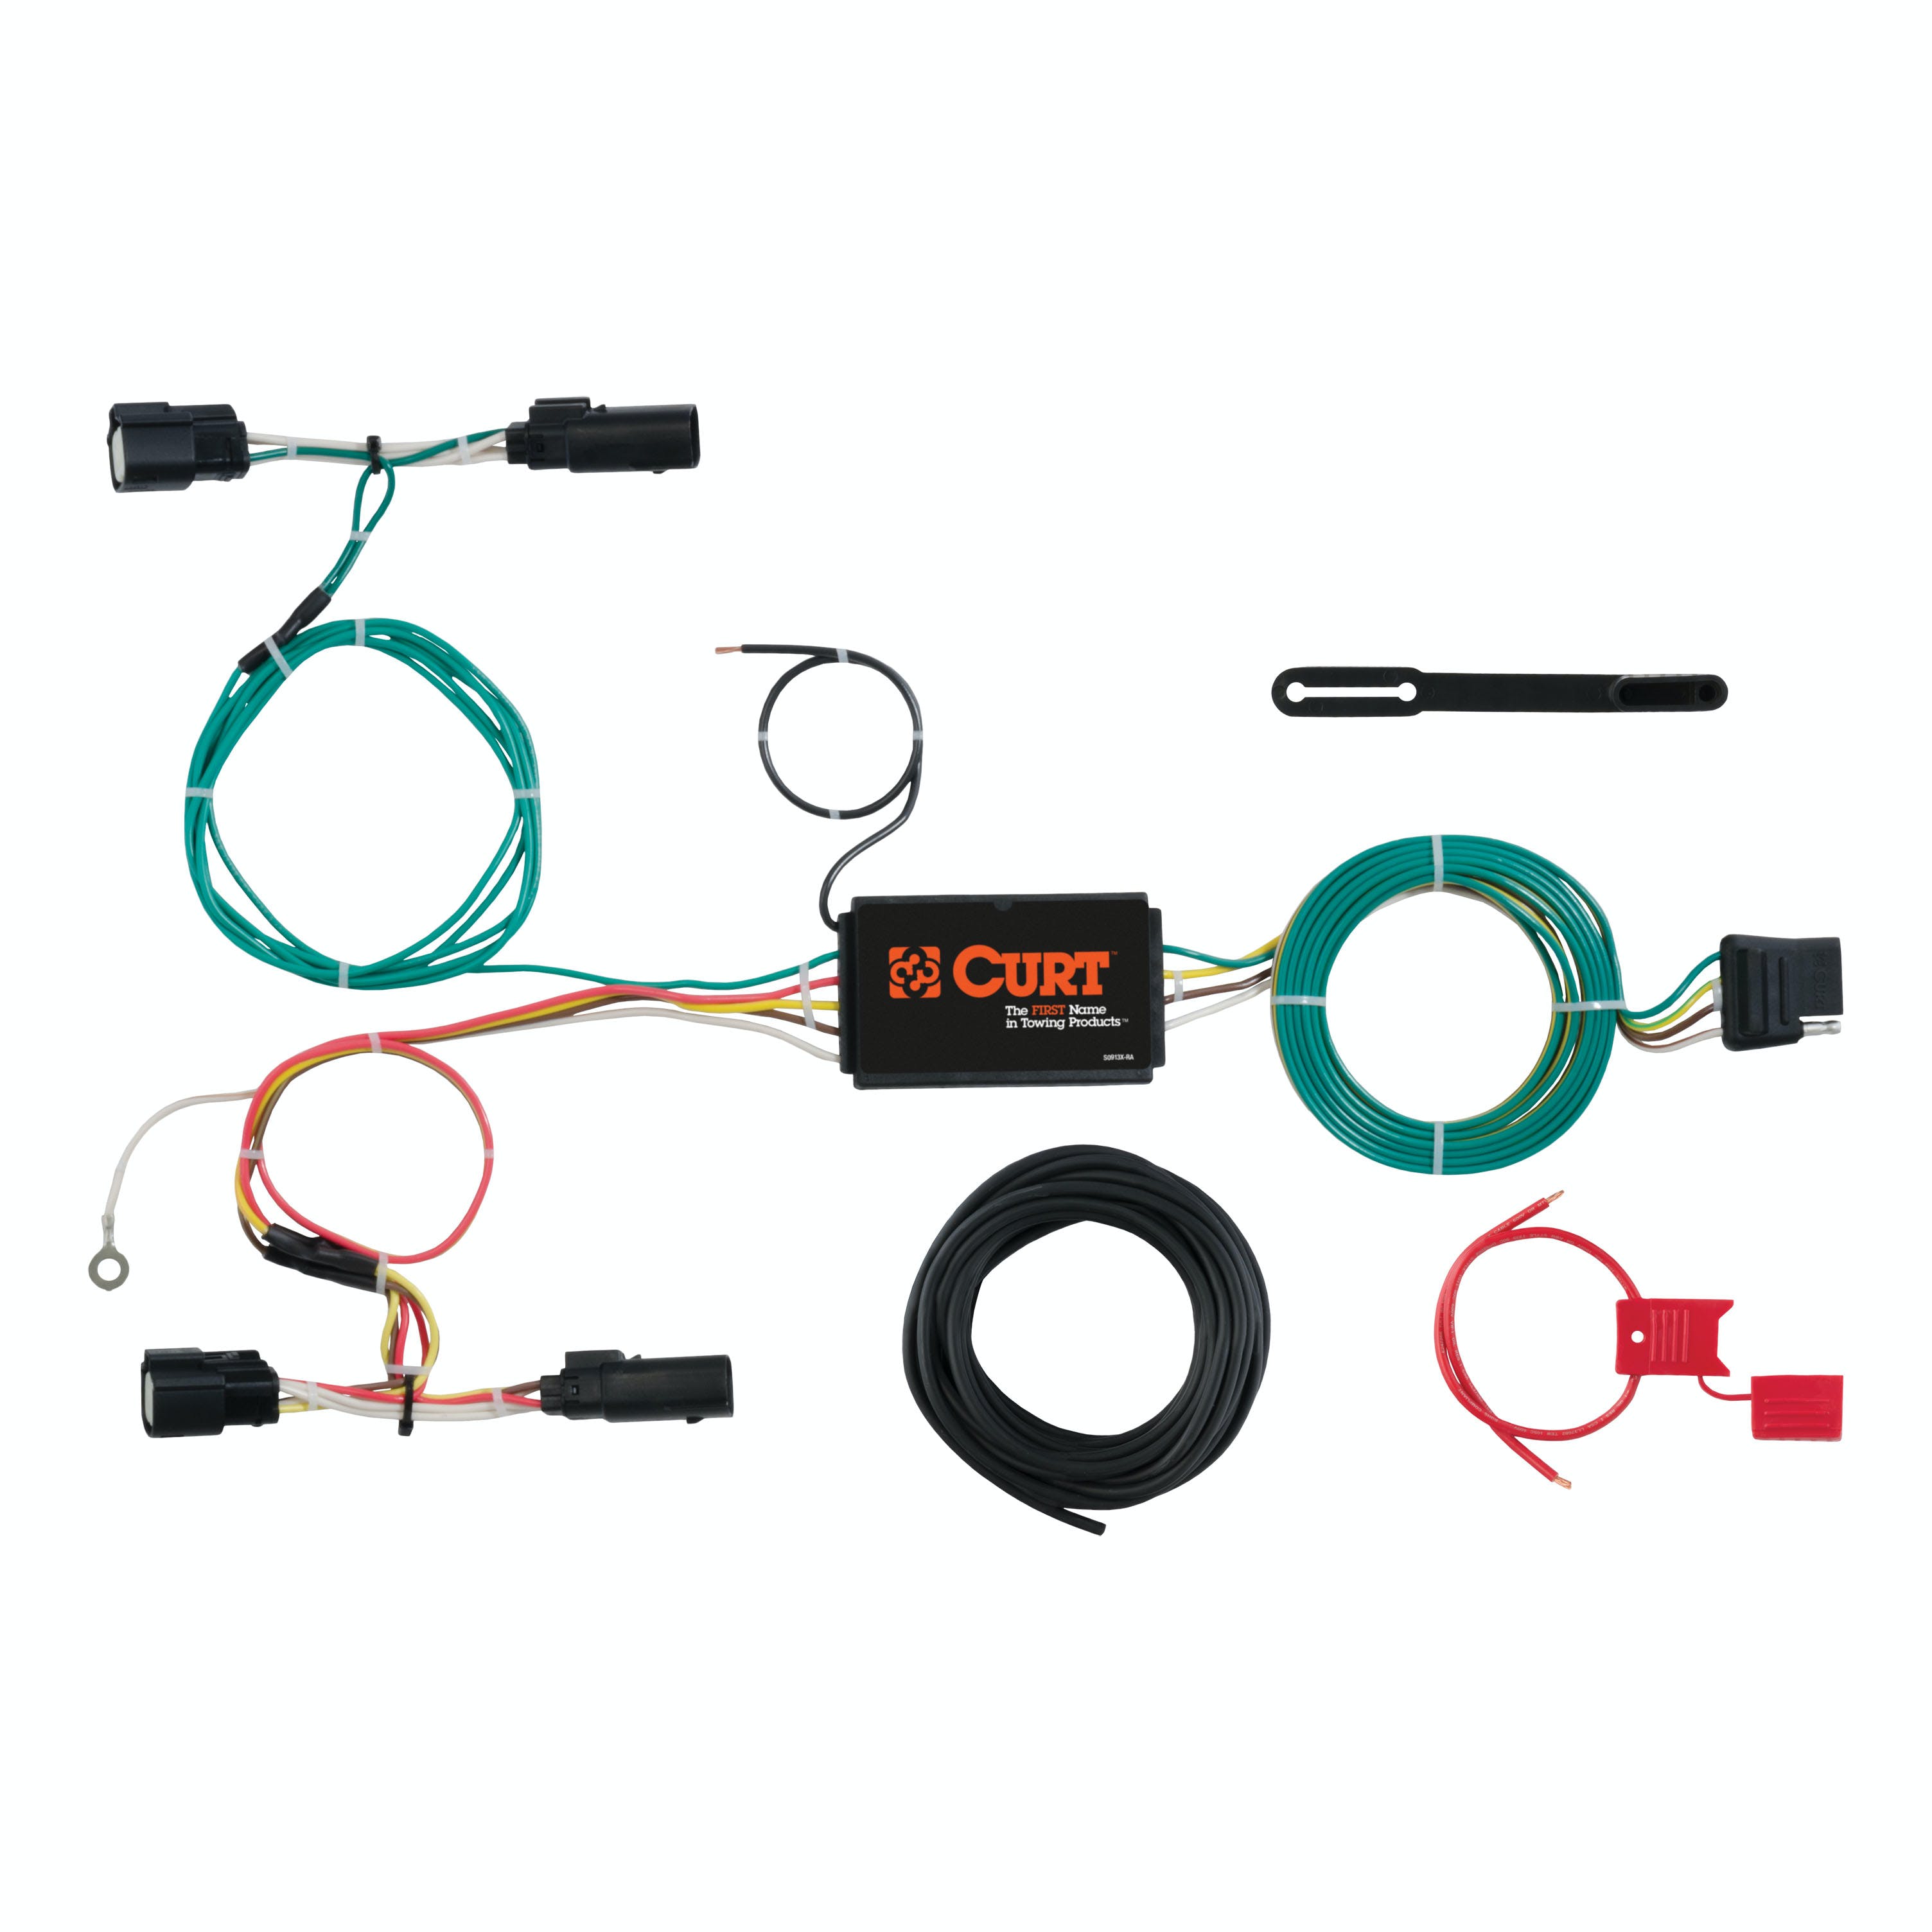 CURT 56273 Custom Wiring Harness, 4-Way Flat Output, Select Ford Focus Hatchback